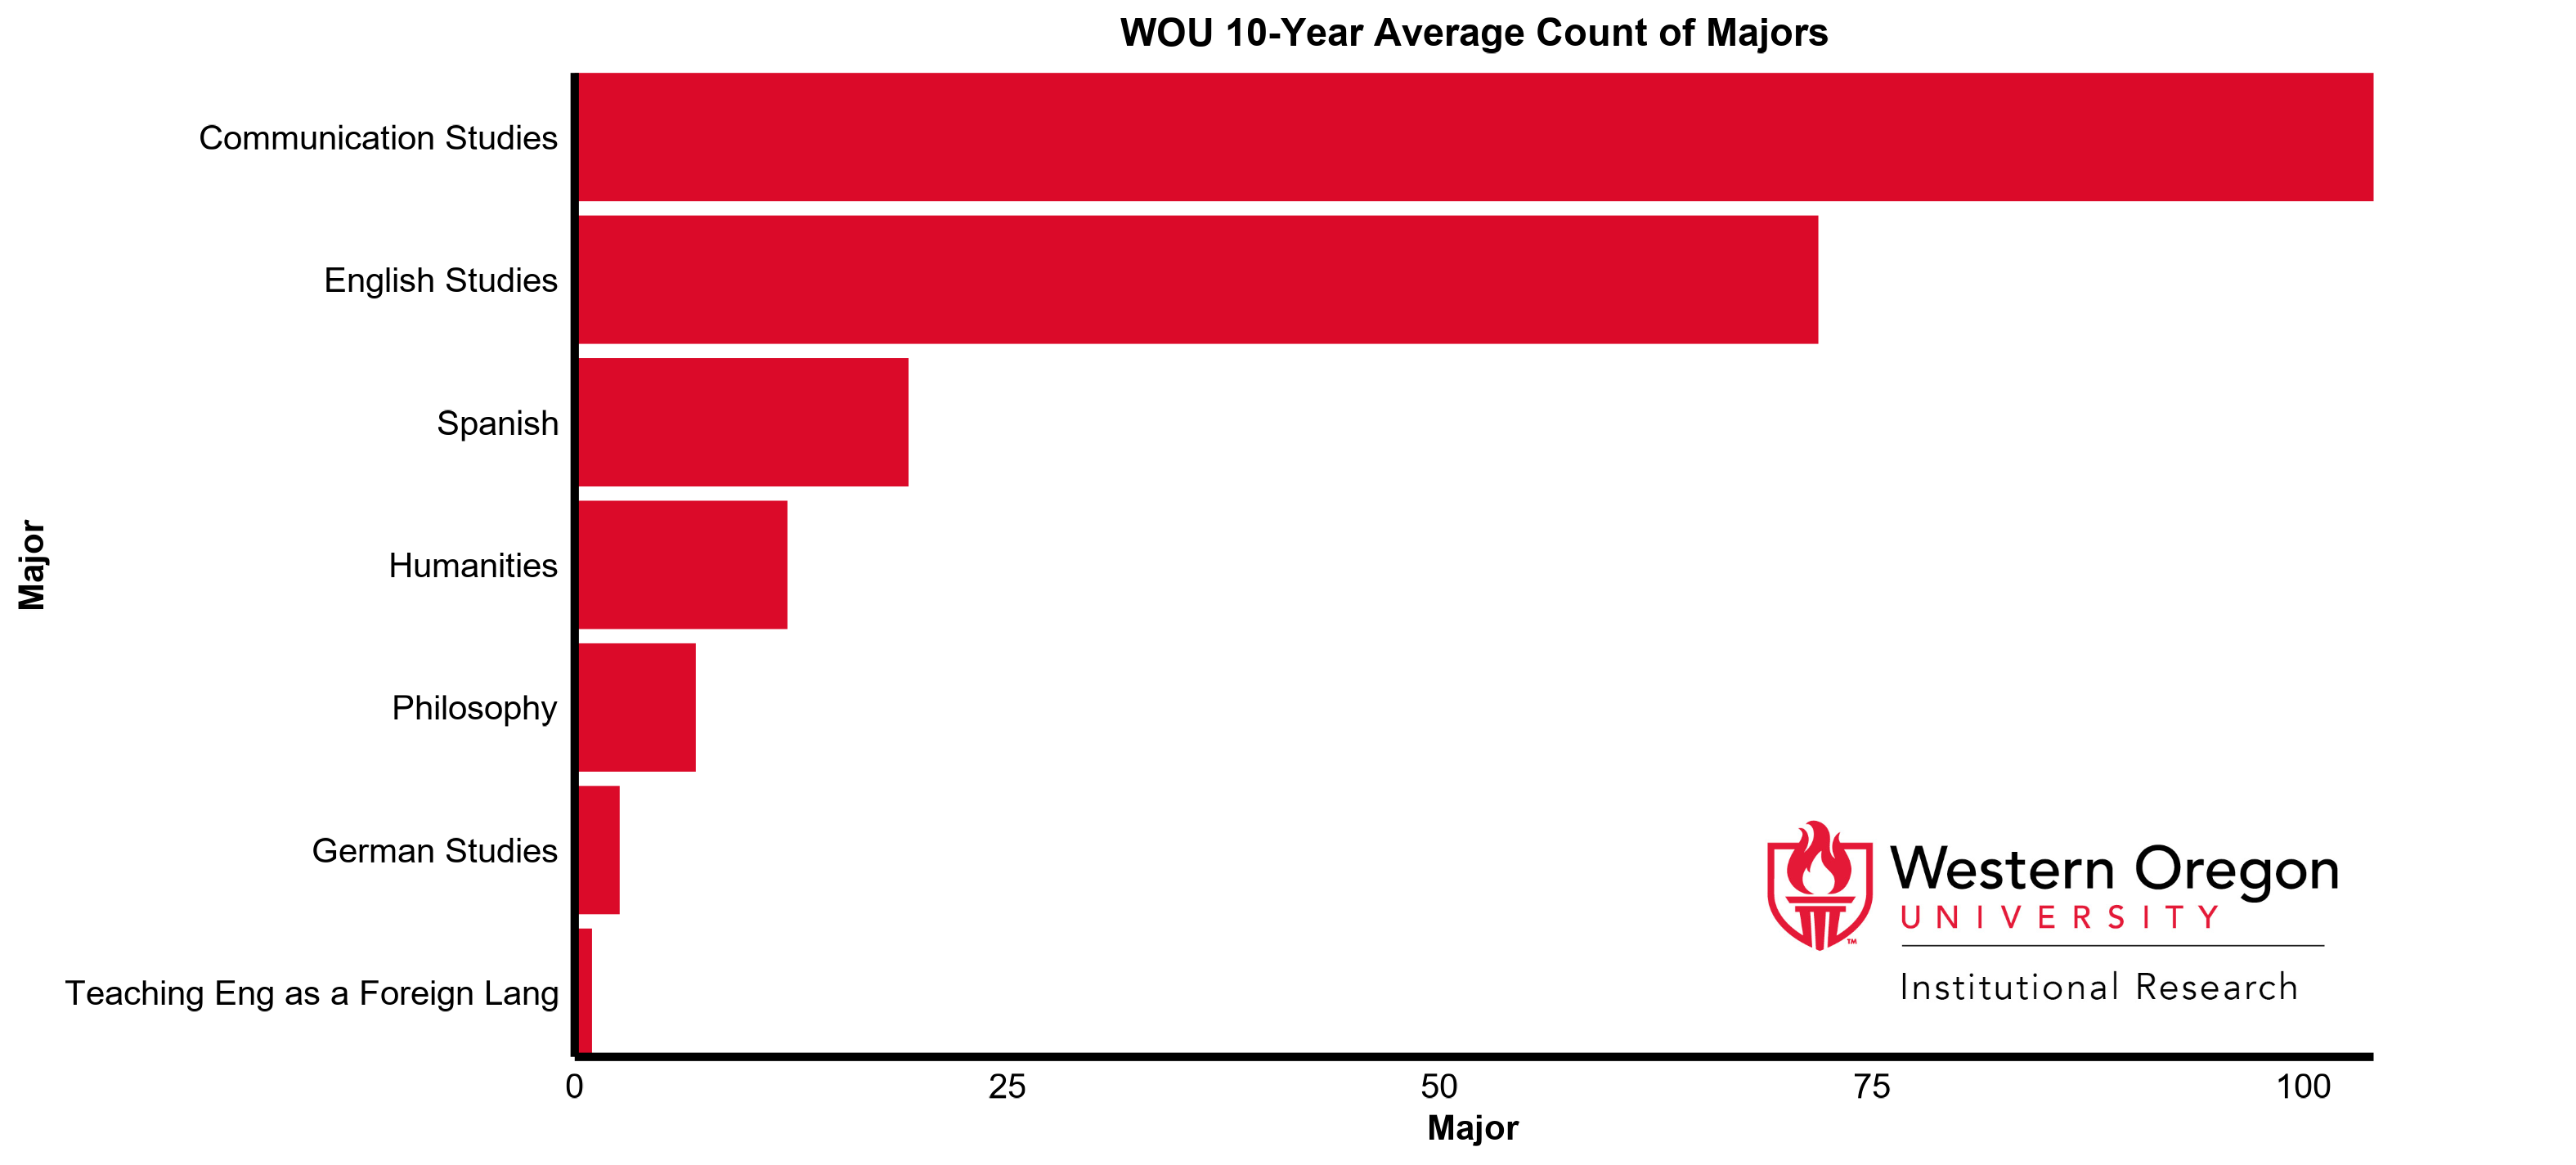 Bar graph of the 10-year average count of majors at WOU for the Humanities division